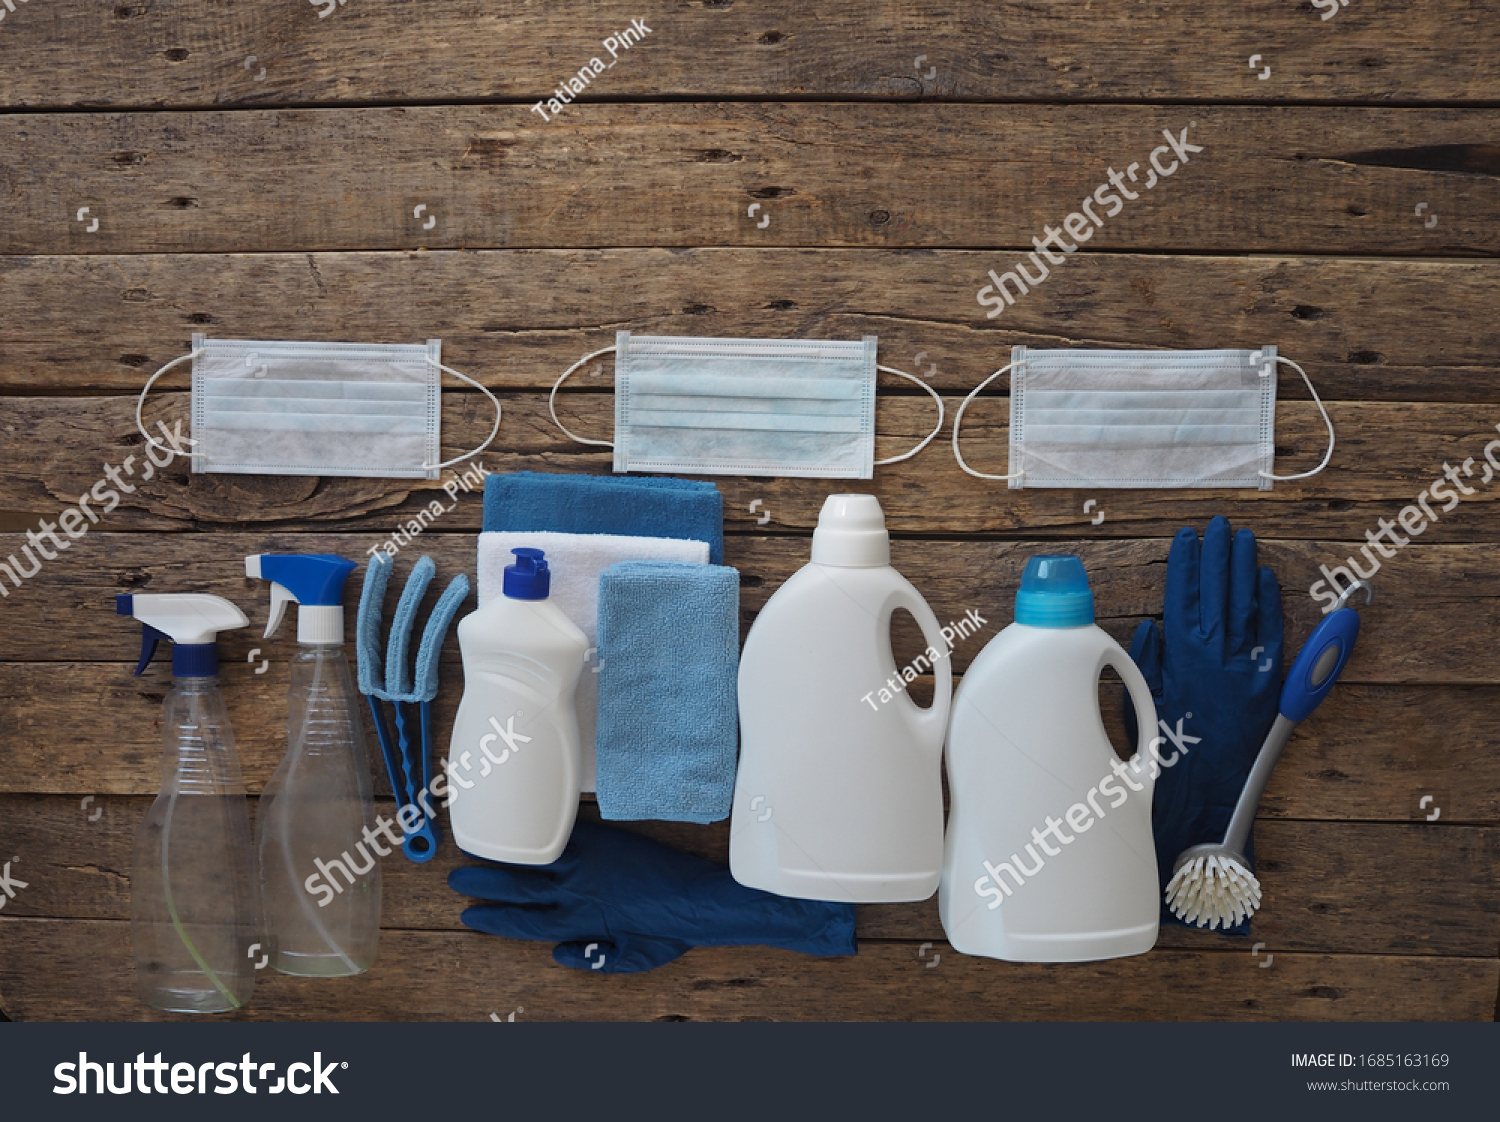 Koronavirus. The idea of cleaning the house during quarantine. Medical protective masks and plastic rubble with cleaning and disinfectants on a natural wooden background. Spend time at home.  #1685163169